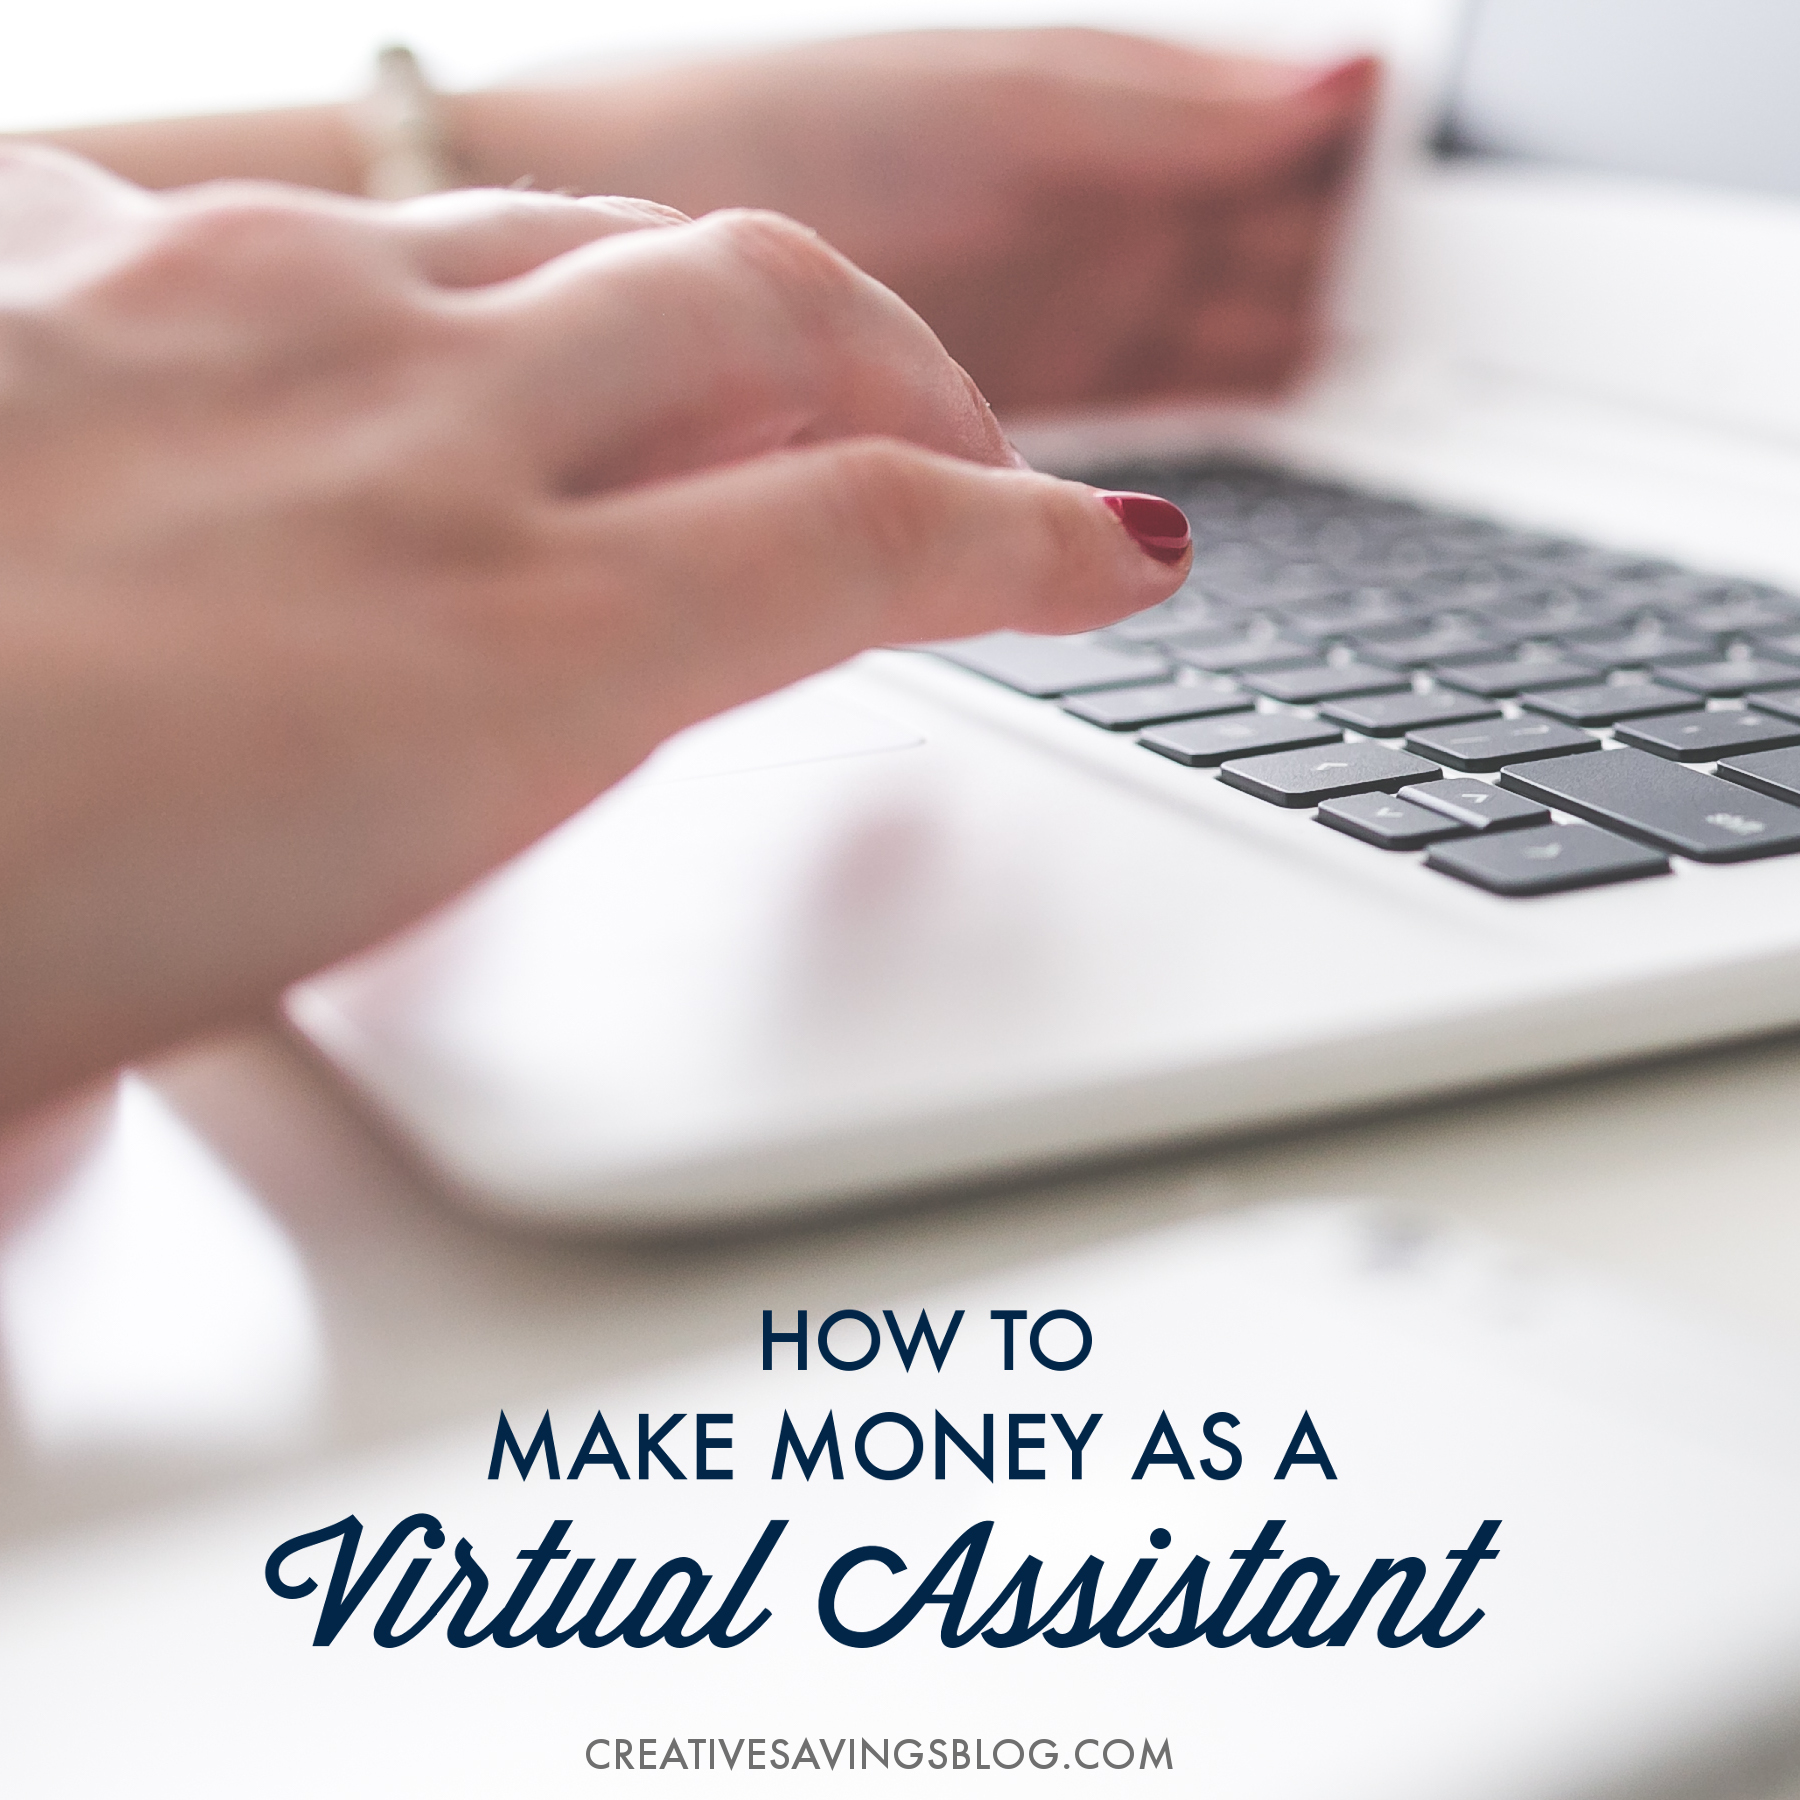 How to Make Money as a Virtual Assistant